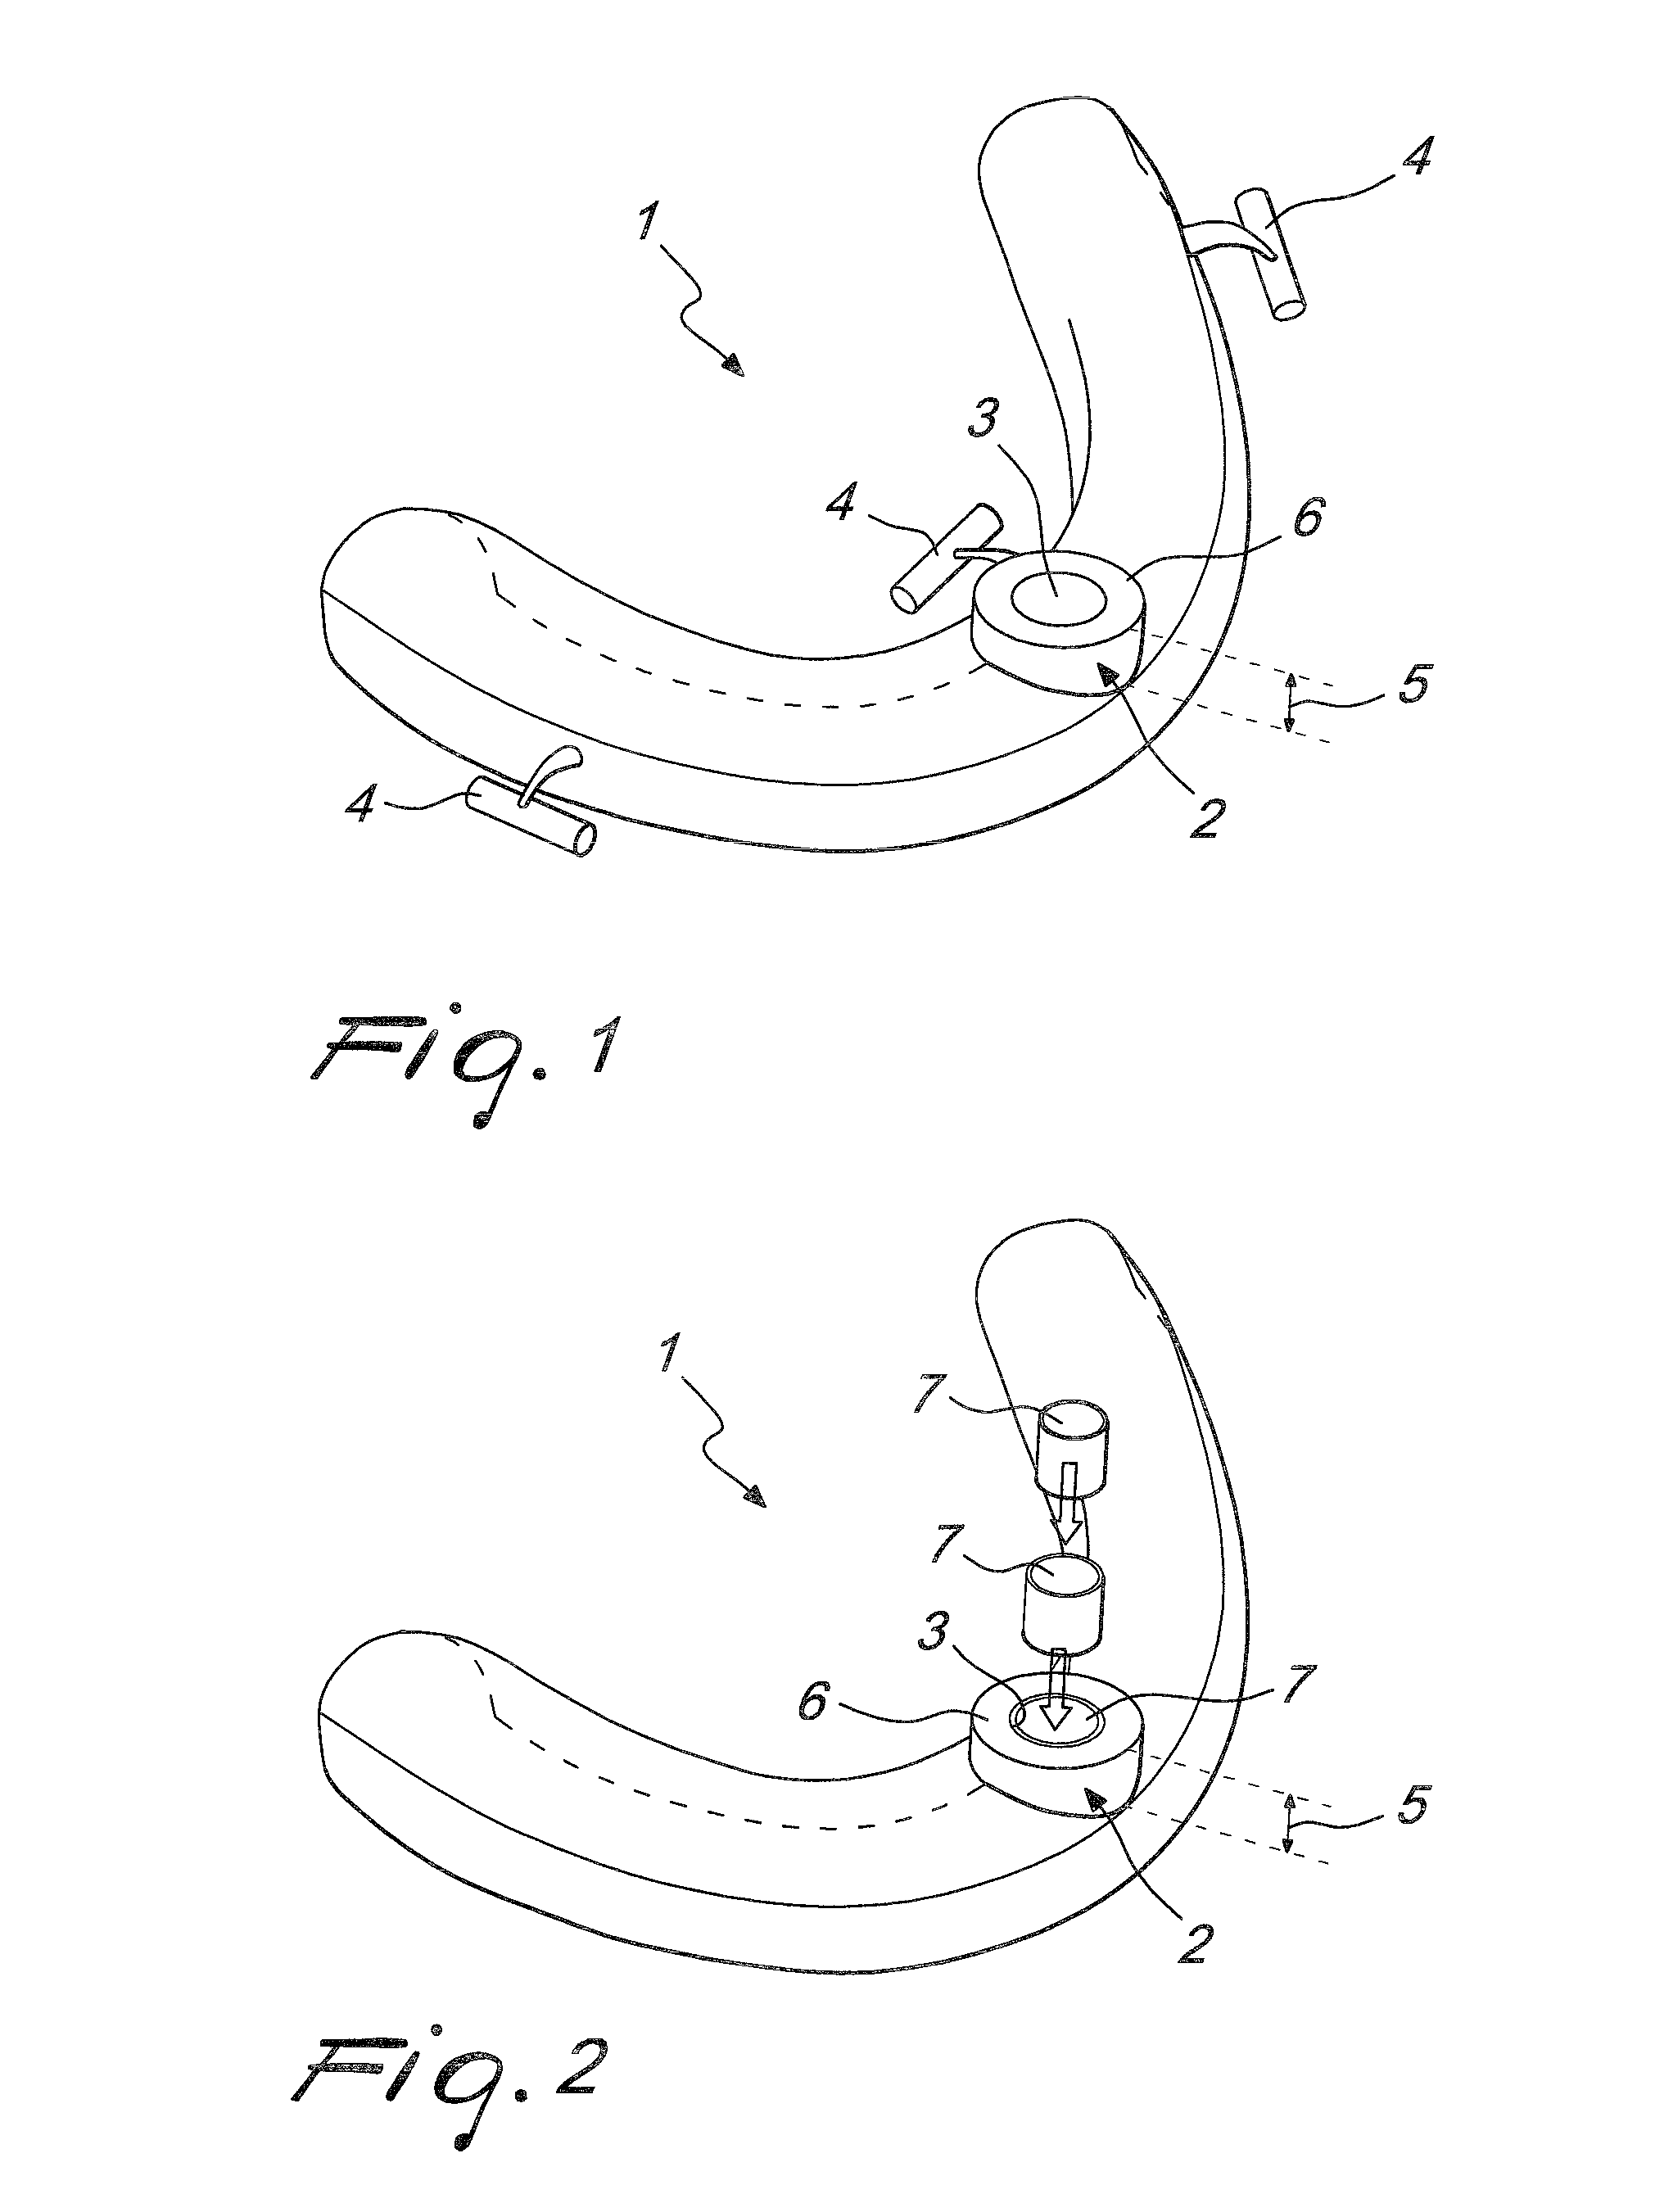 Surgical drill templates and methods of manufacturing the same